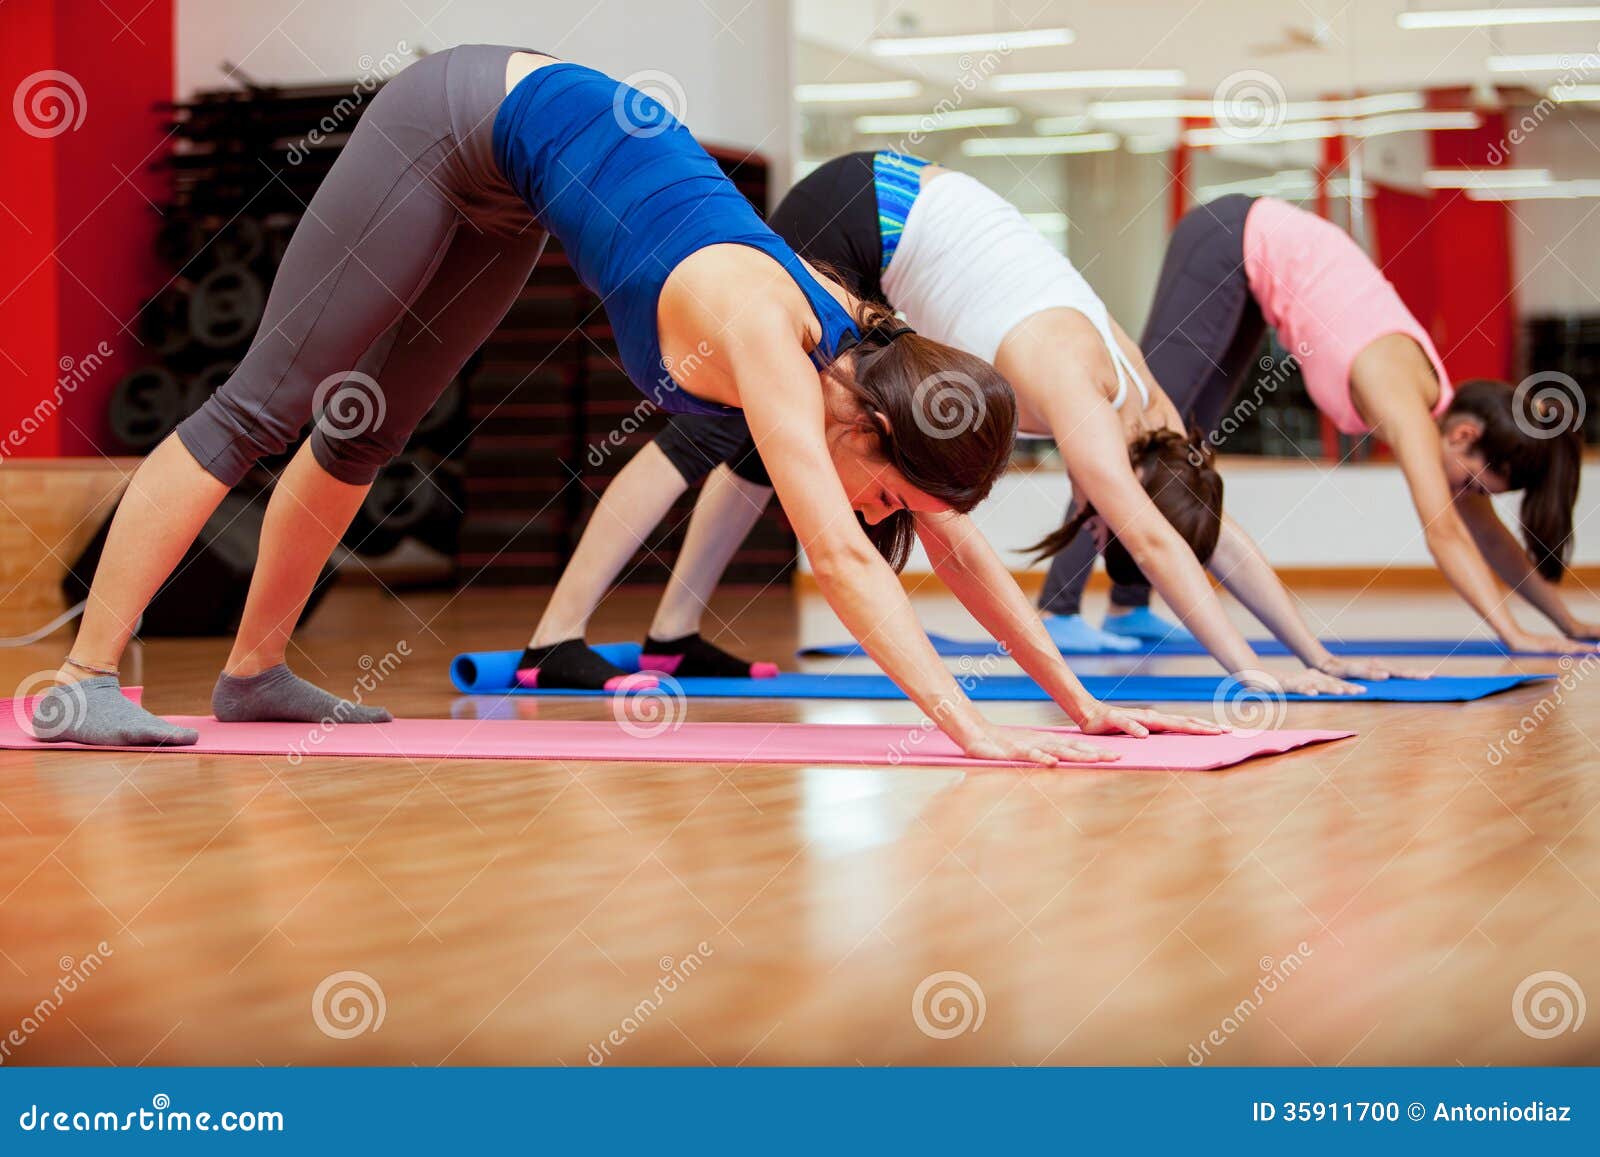 Trying A New Pose During Yoga Class Stock Photo - Image of copy, people